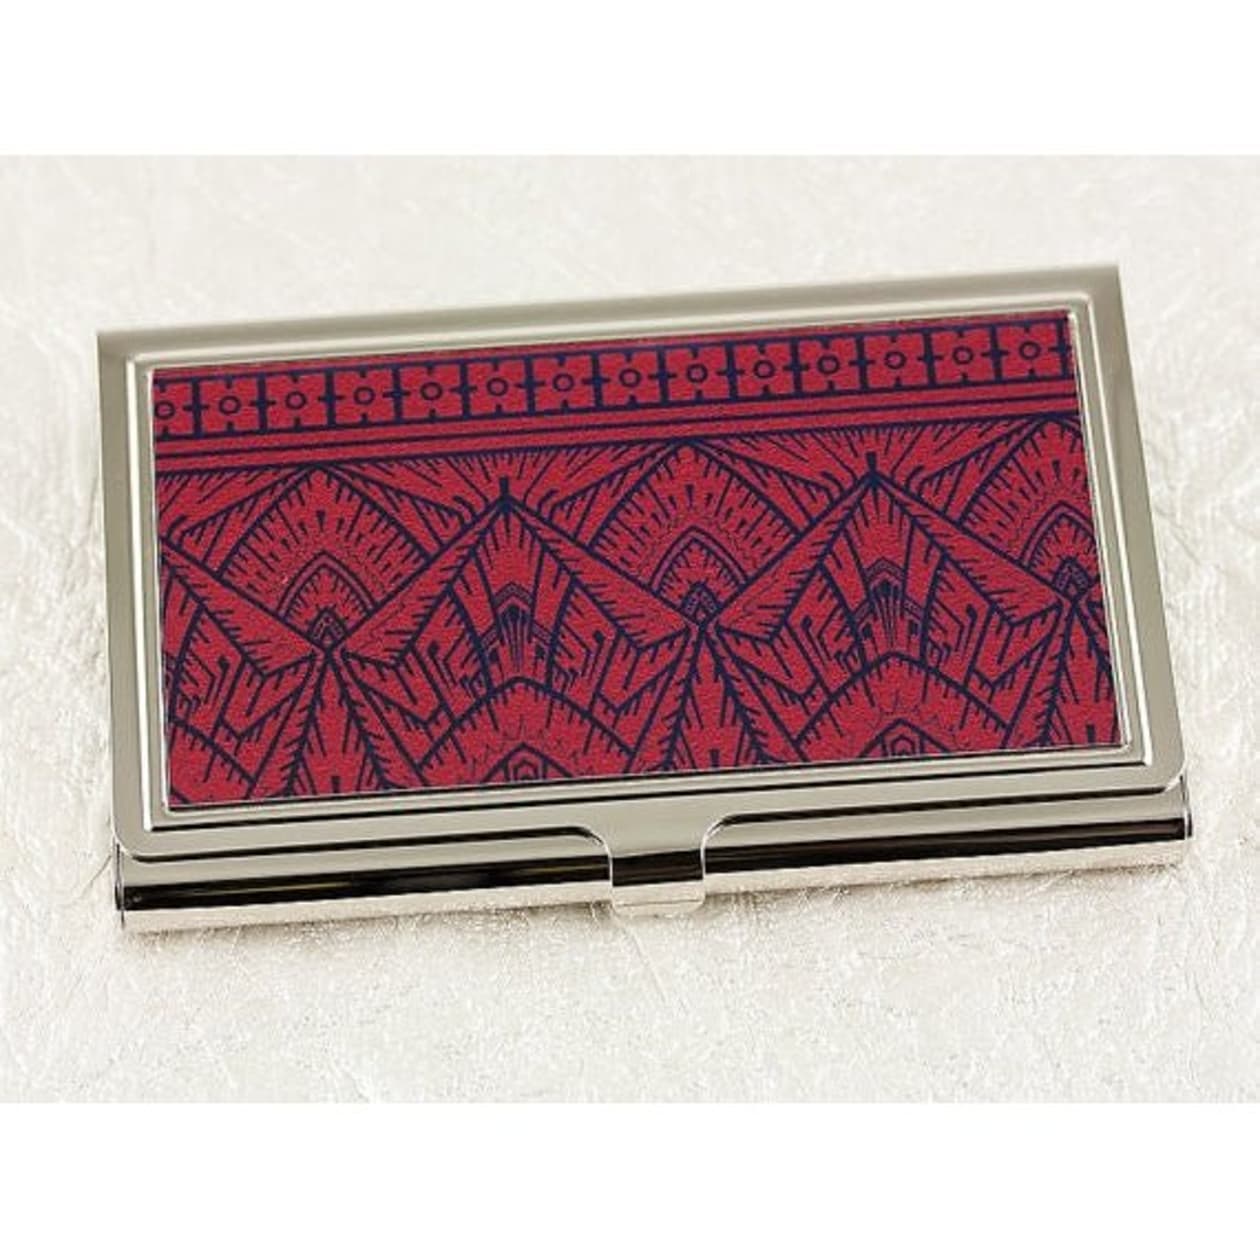 Handmade Art Deco Business Card Case in Crimson Red and Black